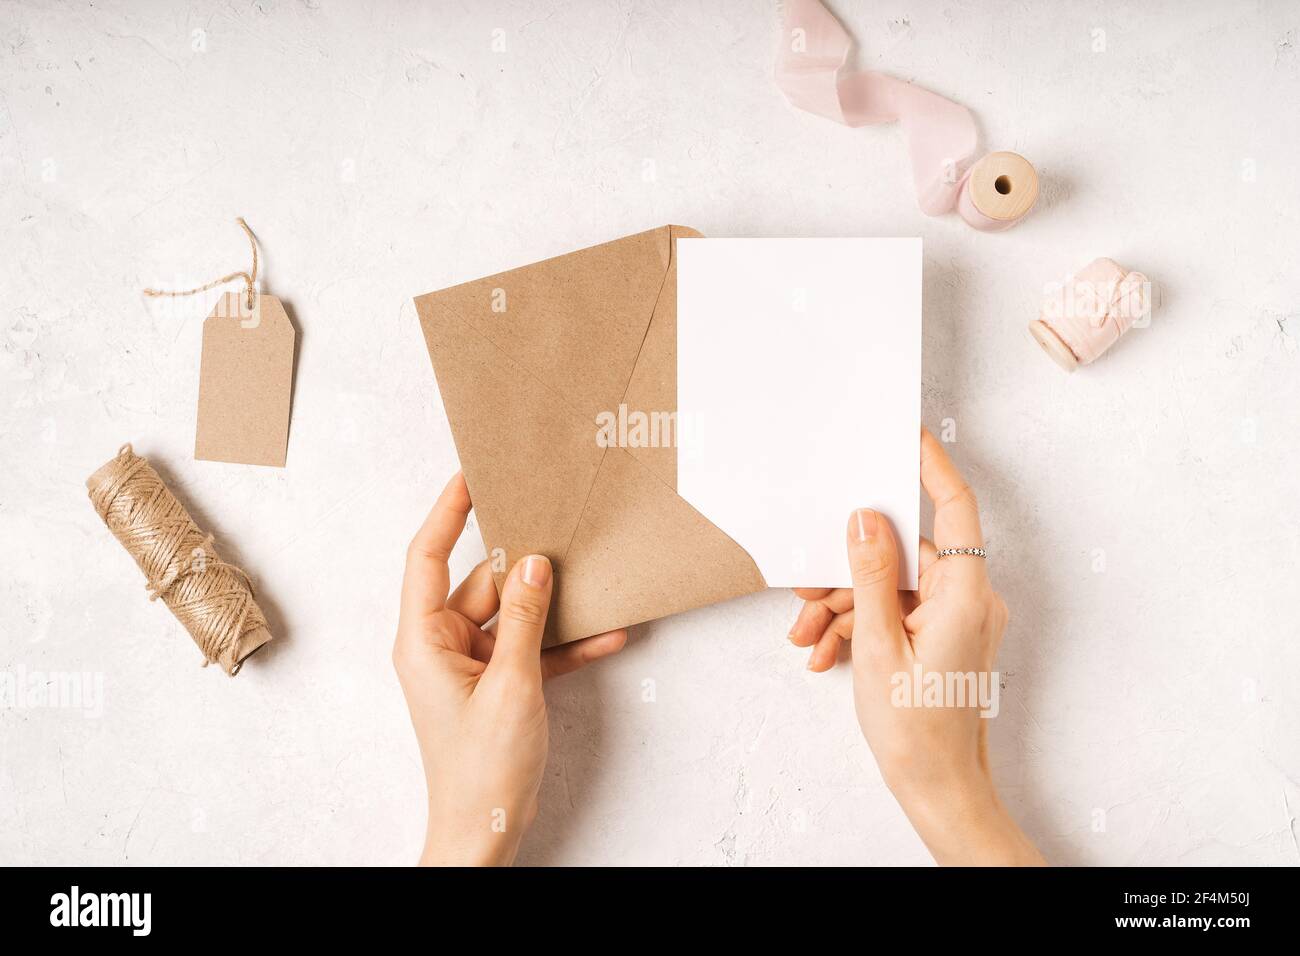 Blank white card with craft paper envelope in hands Stock Photo